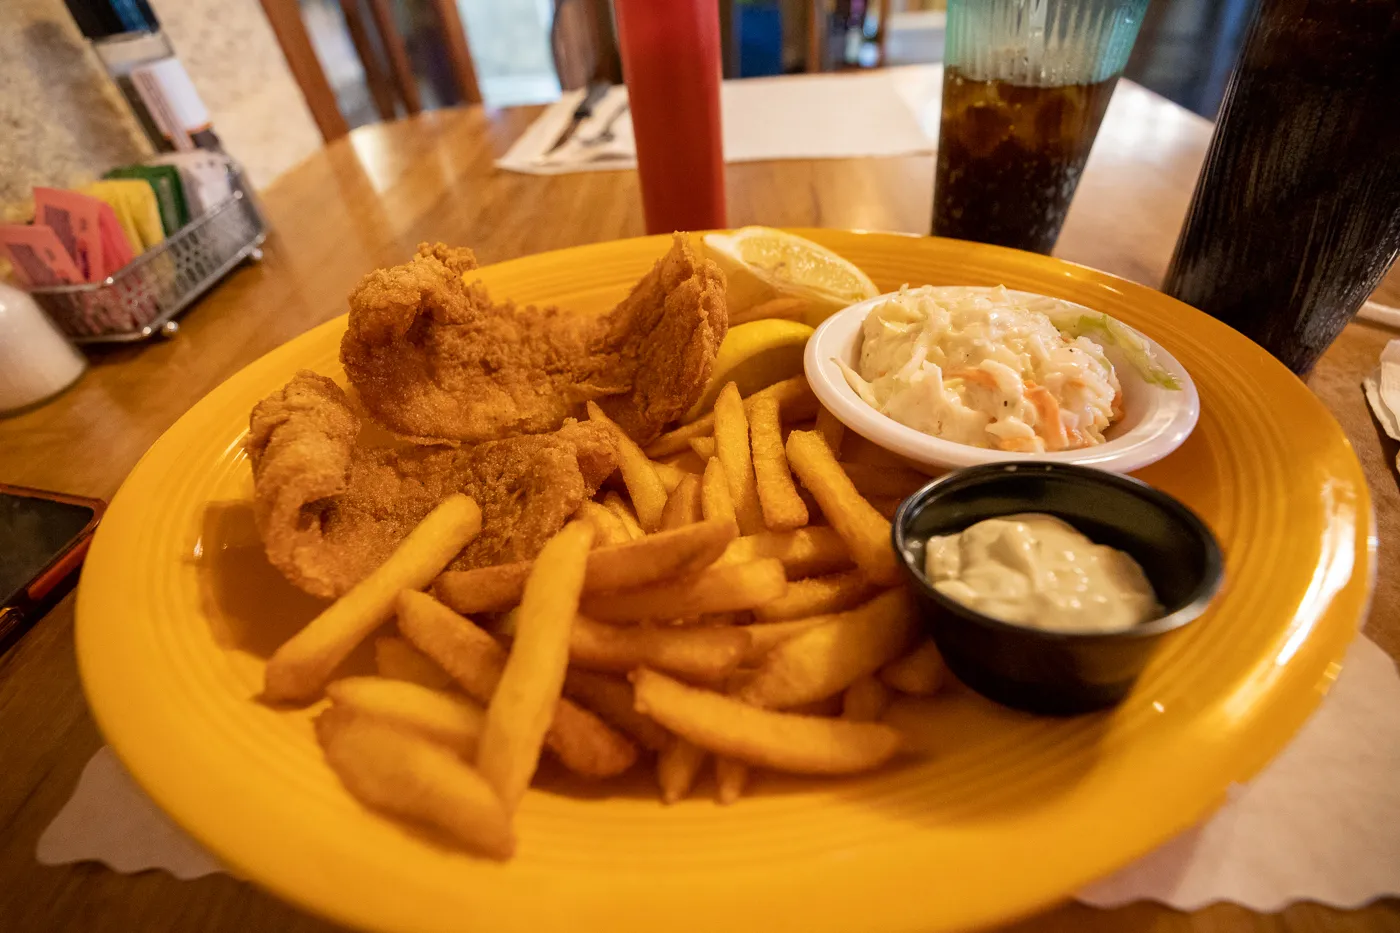 Fried Catfish dinner at Del's Restaurant in Tucumcari, New Mexico on Route 66